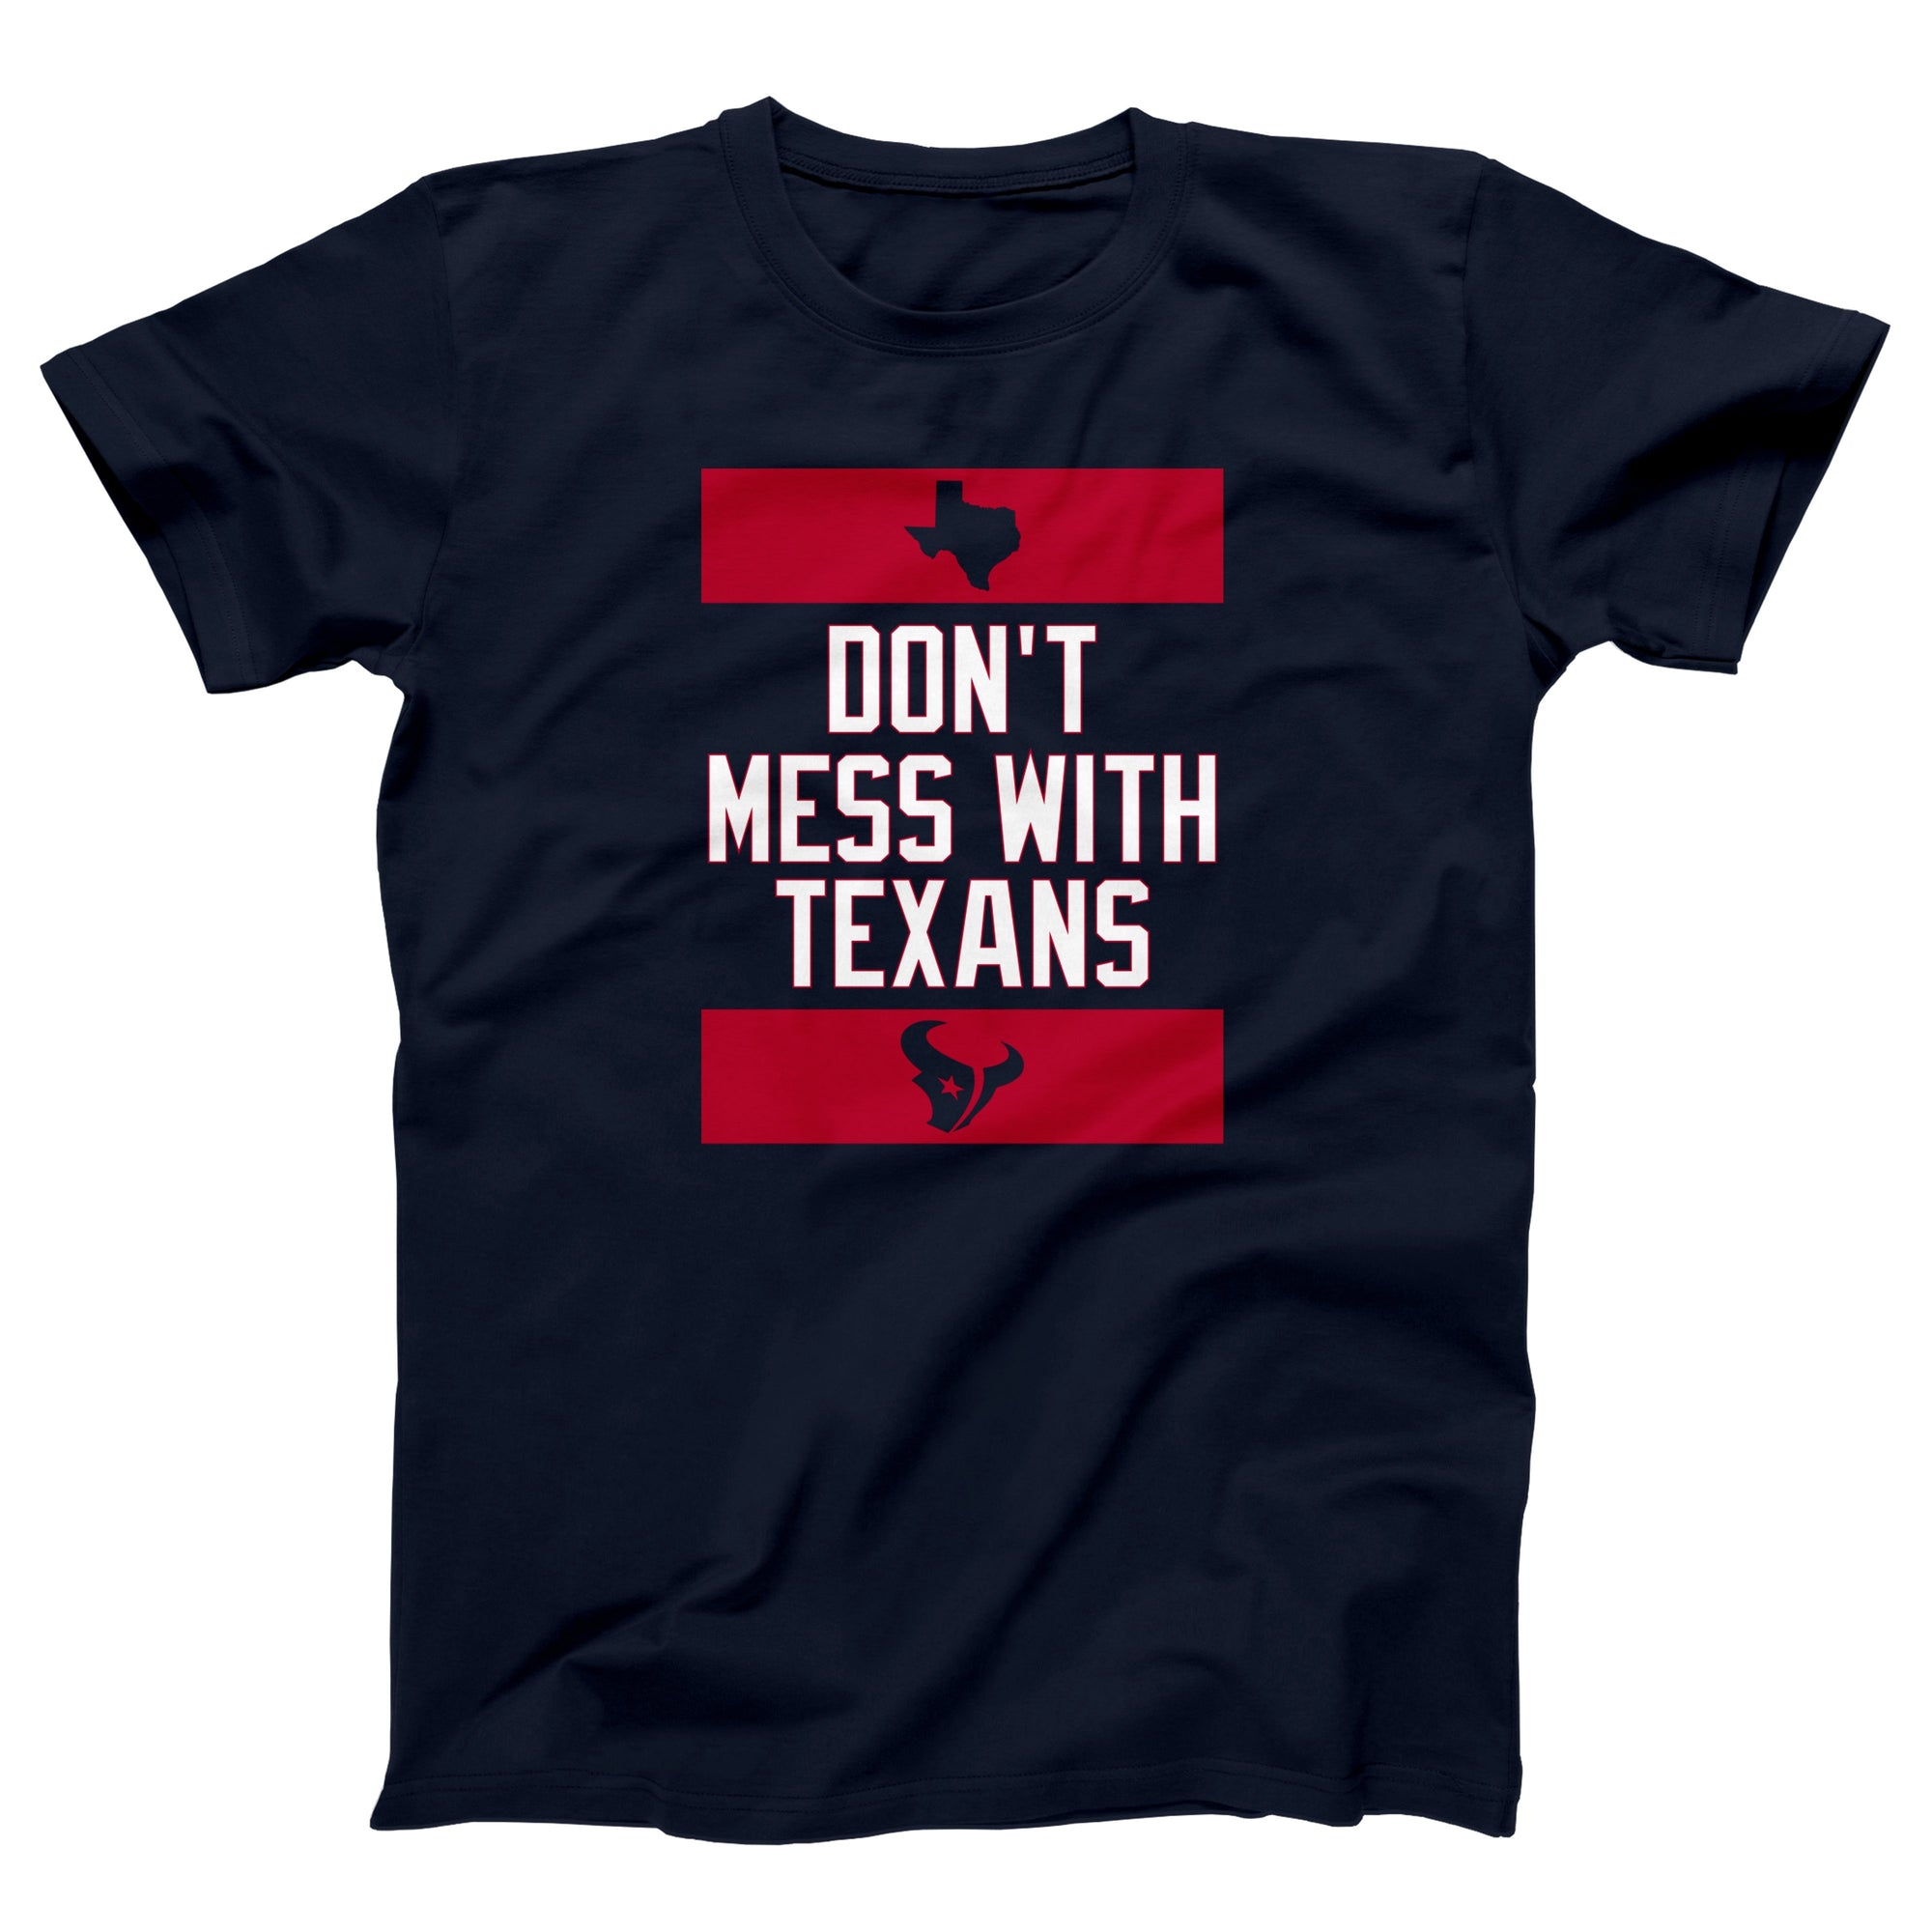 Don't Mess With Texans Adult Unisex T-Shirt - Twisted Gorilla